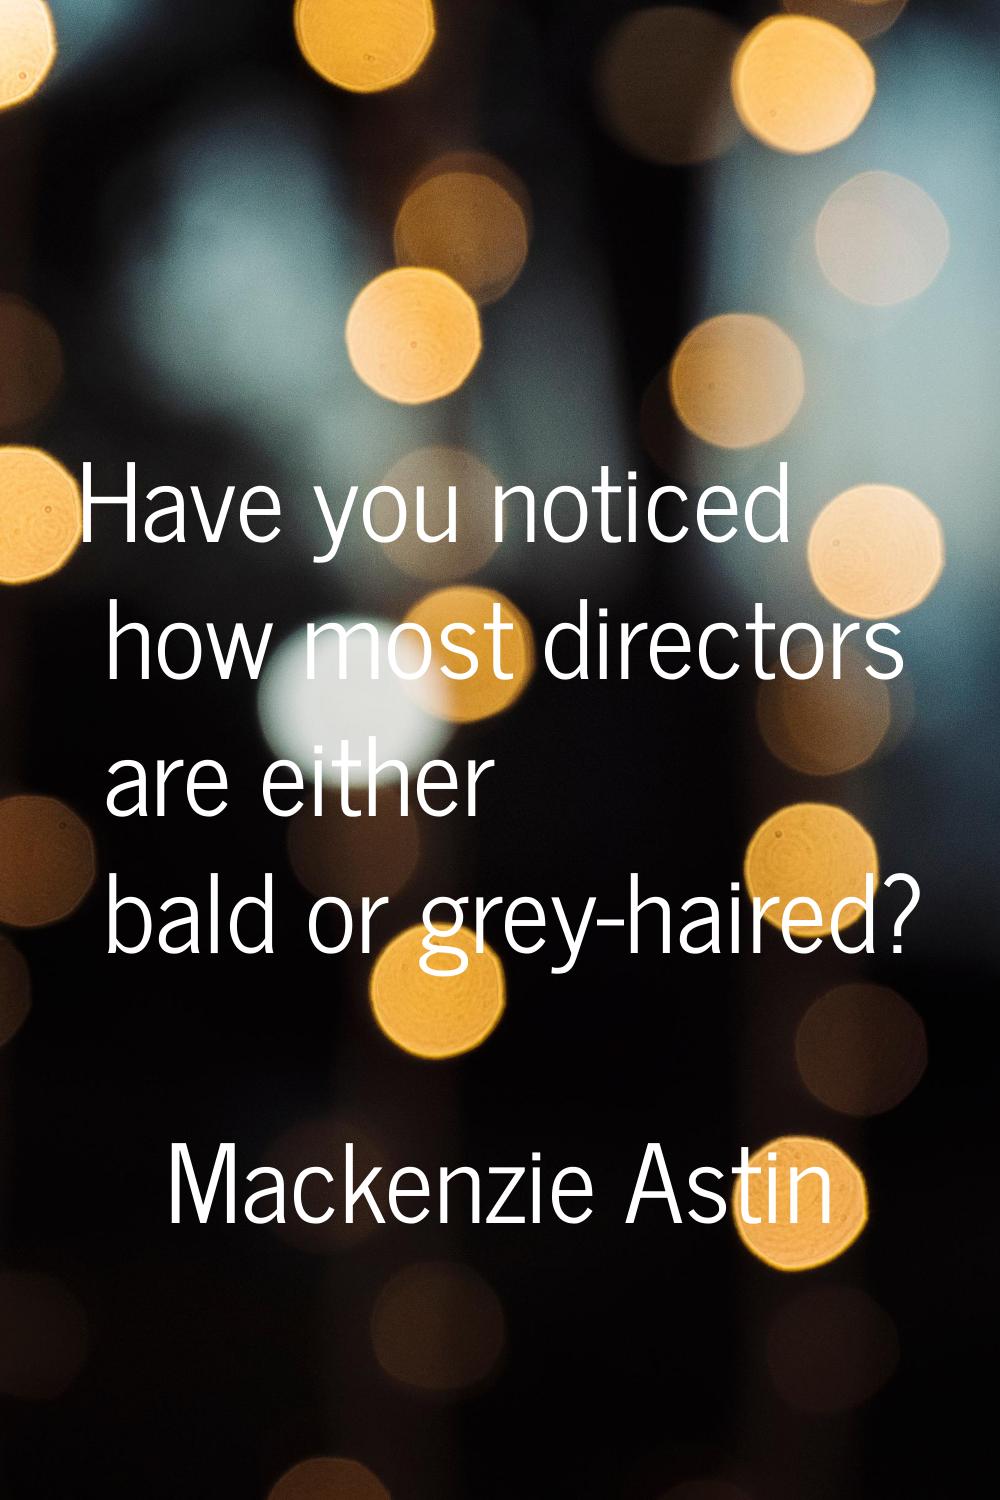 Have you noticed how most directors are either bald or grey-haired?